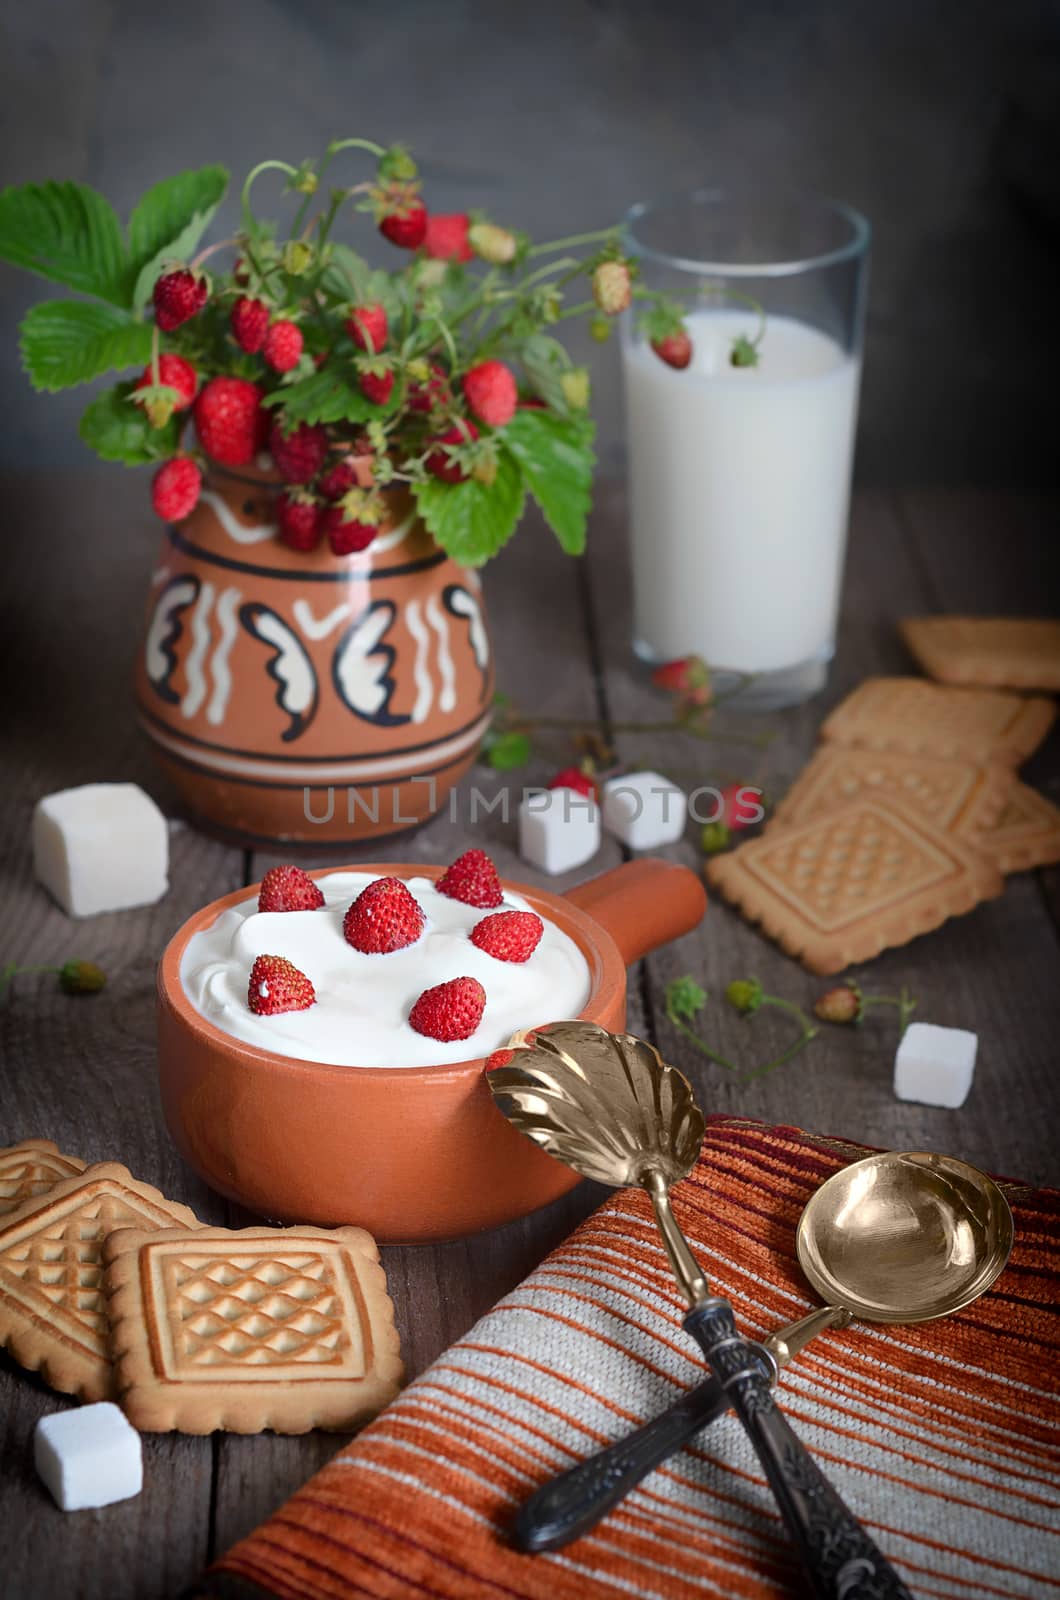 Strawberry with cream in a ceramic Cup, cookies and milk in glass on old wooden surface. Bouquet with strawberries in a ceramic vase and antique spoons on a napkin. The rustic style.